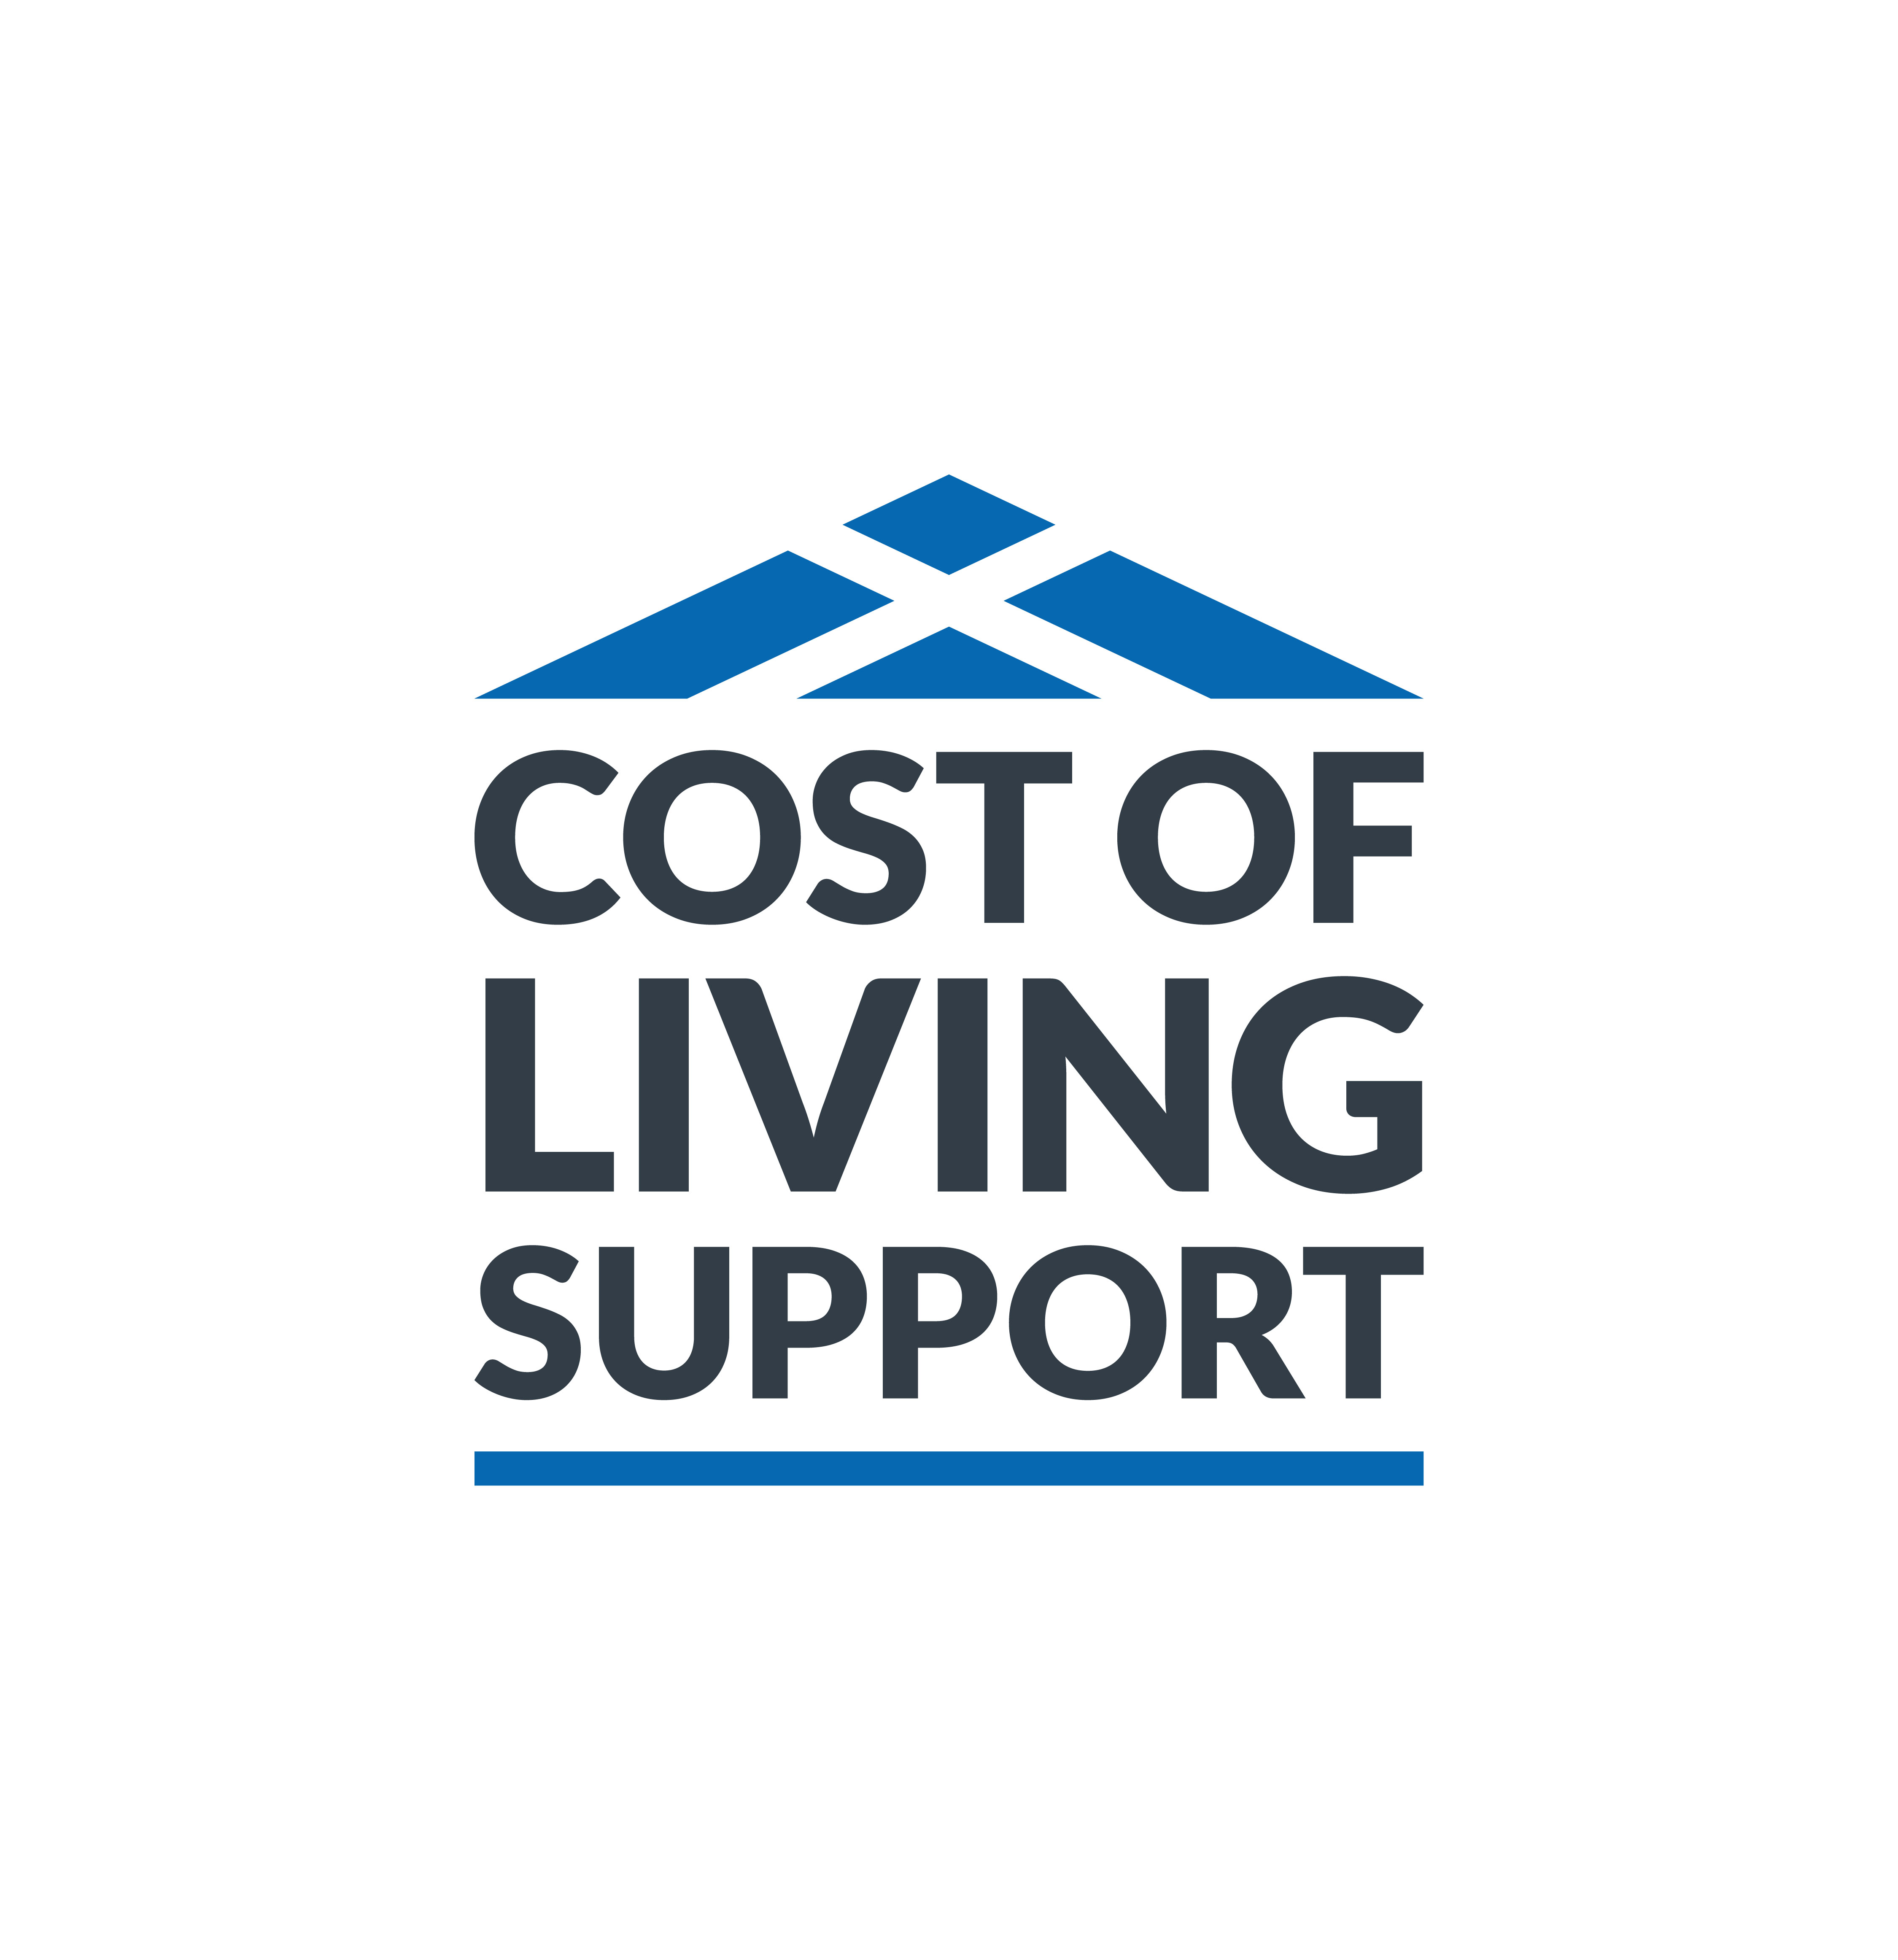 Cost of living support logo